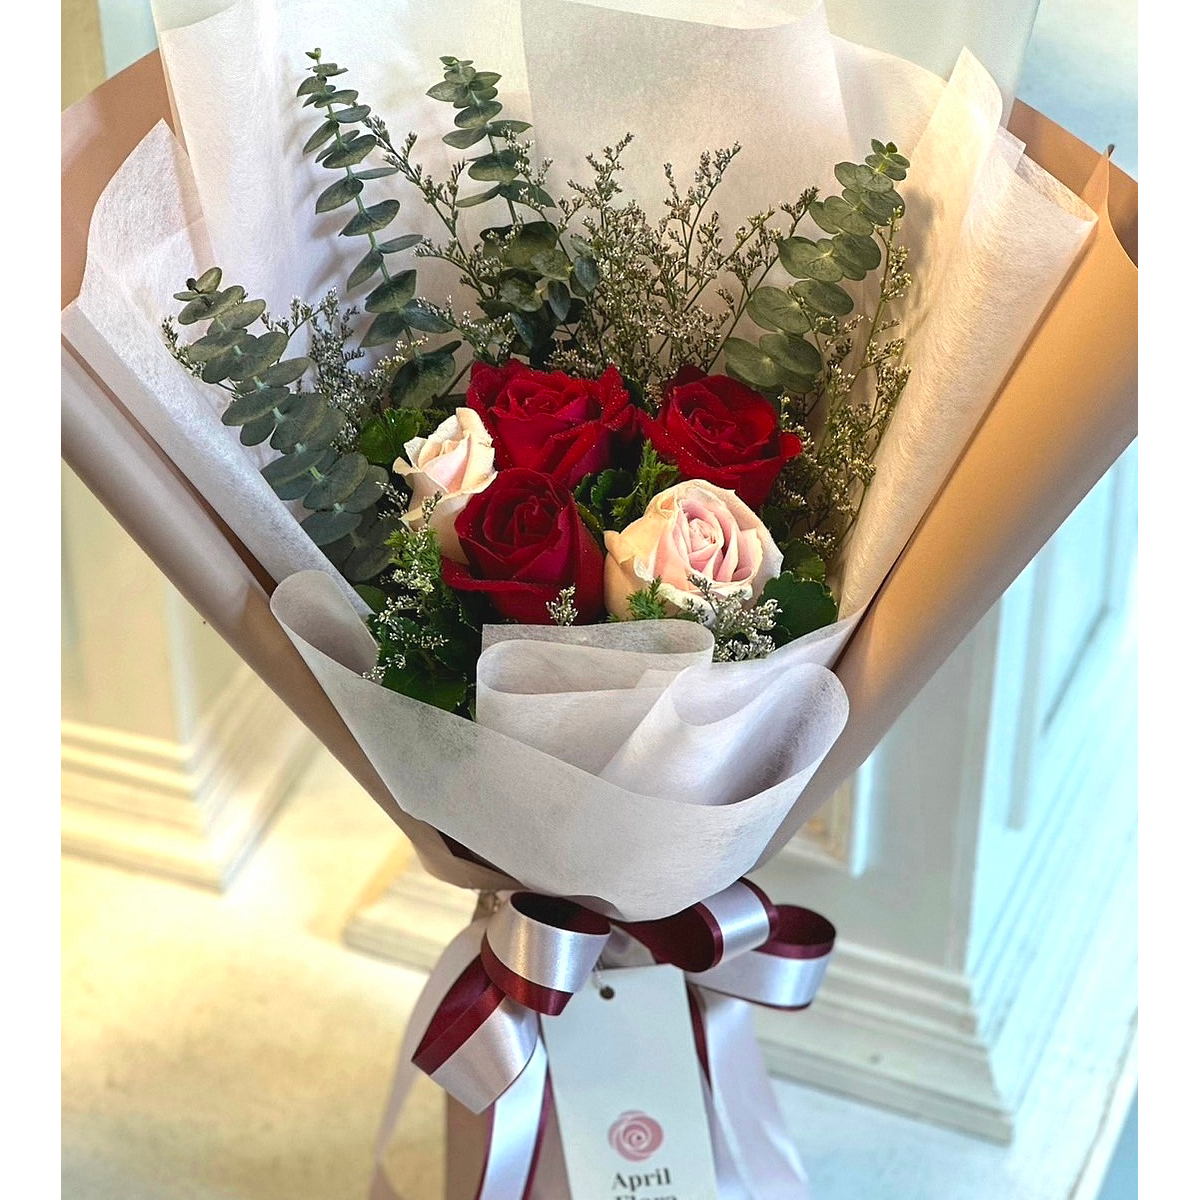 "Surprise" Bouquet Of Roses and Caspia - Phuket